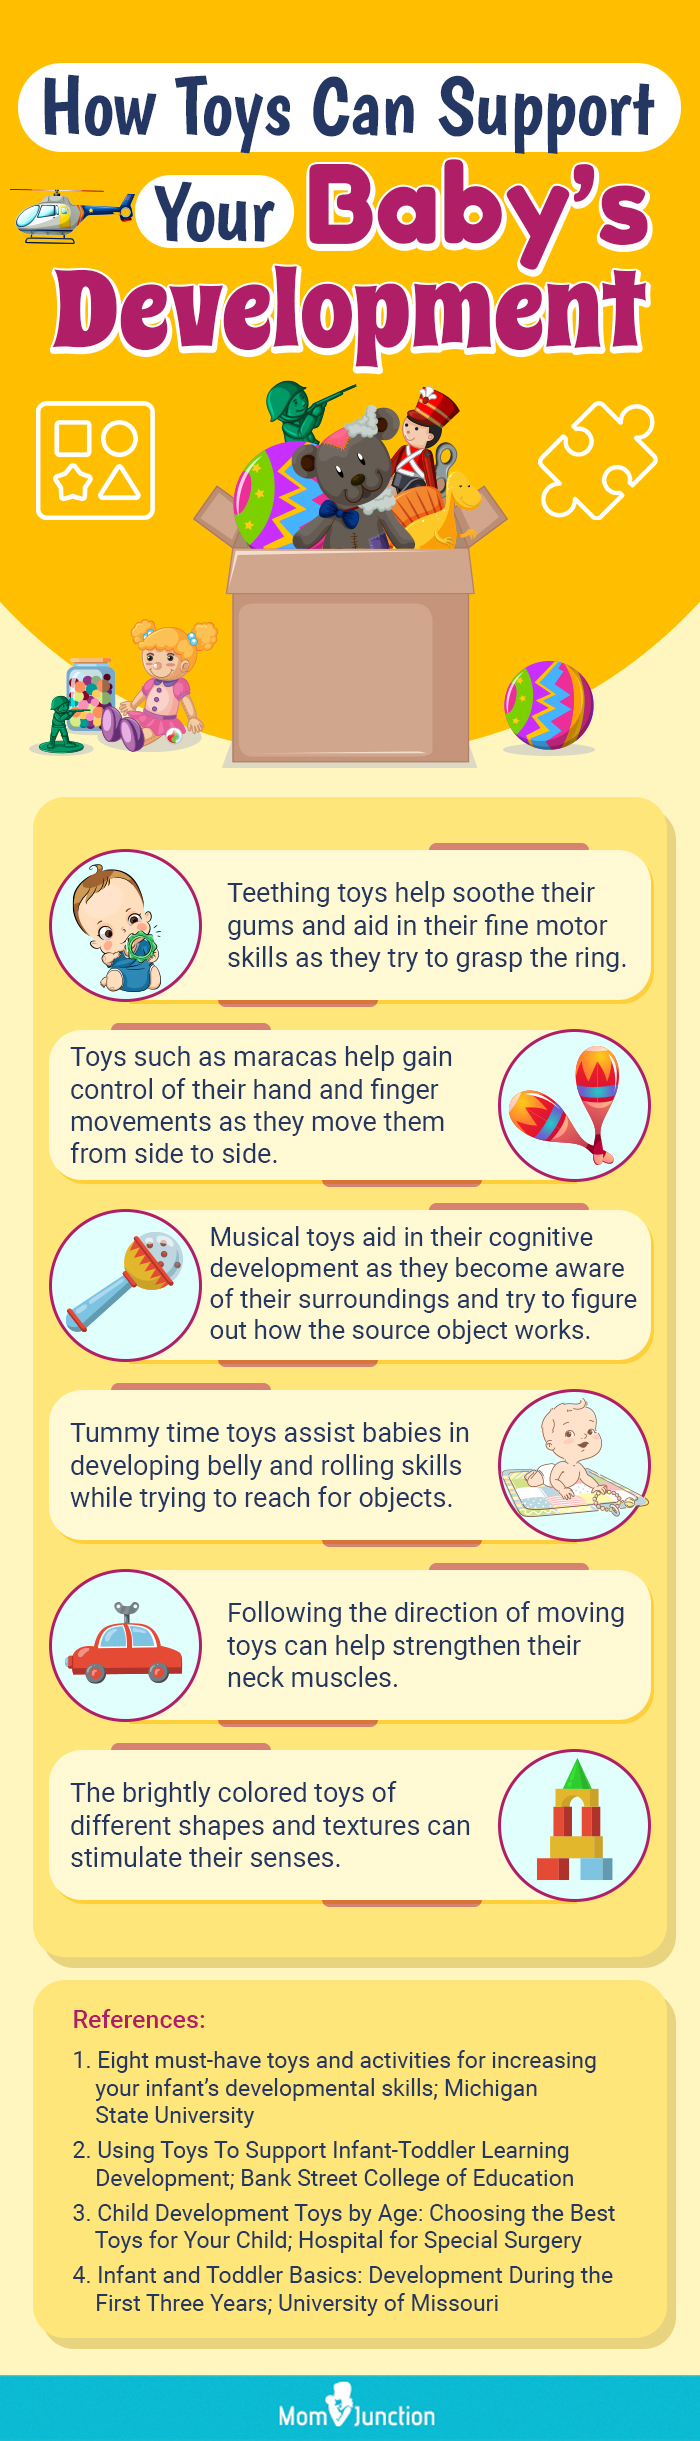 How Toys Can Support Your Baby’s Development (infographic)